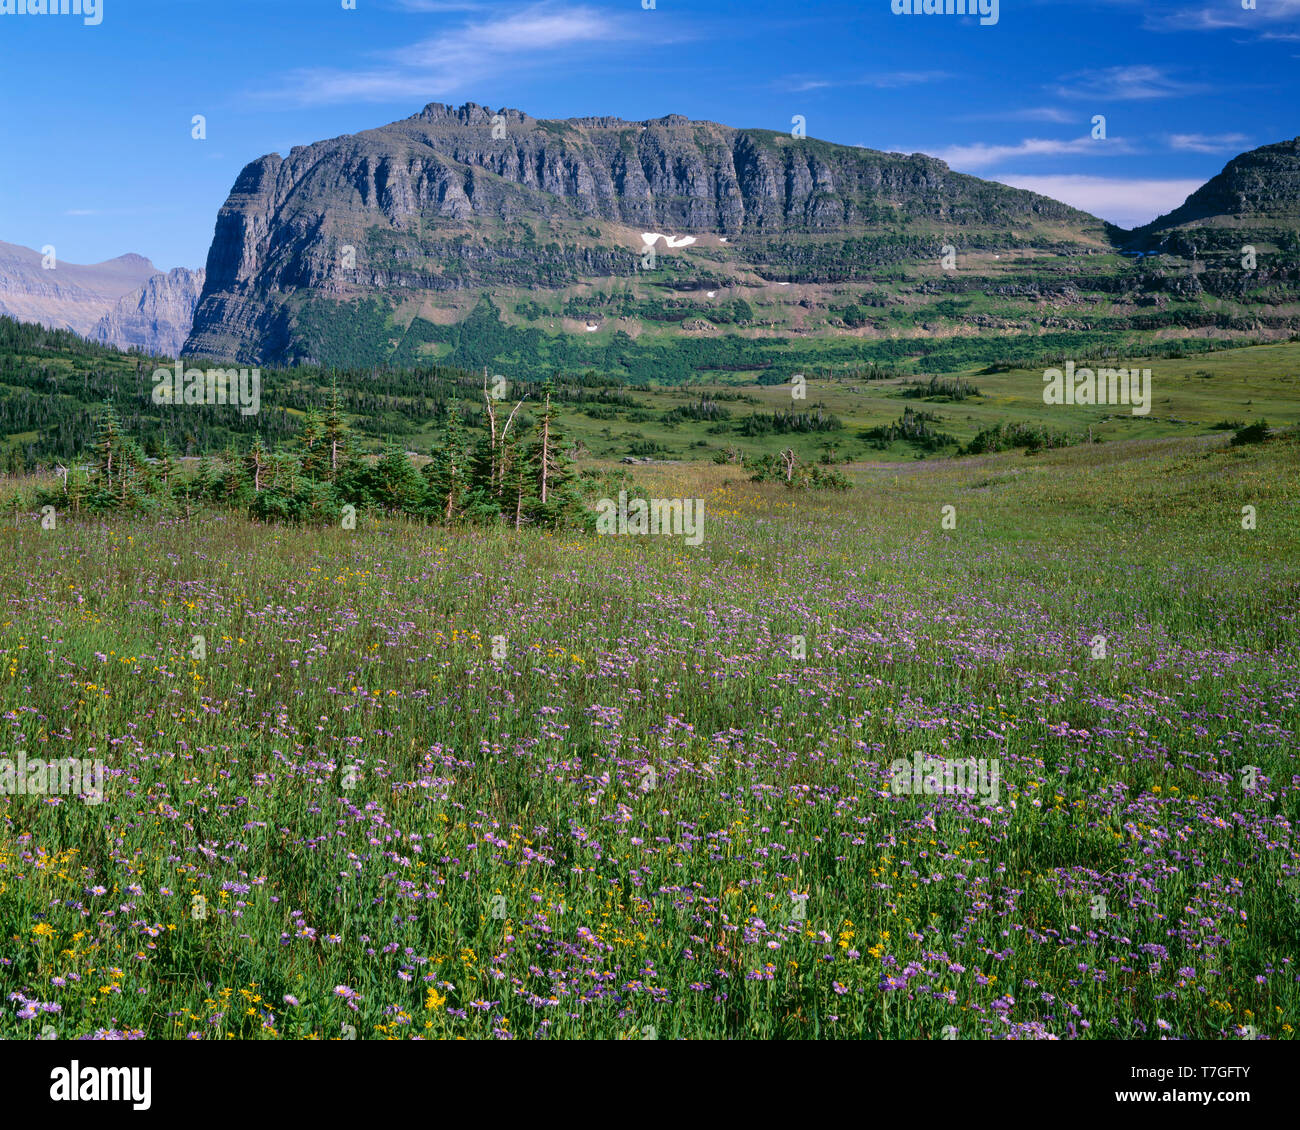 USA, Montana, Glacier National Park, Heavy Runner Mountain rises beyond meadow of showy fleabane and arnica at Hanging Gardens area above Logan Pass. Stock Photo